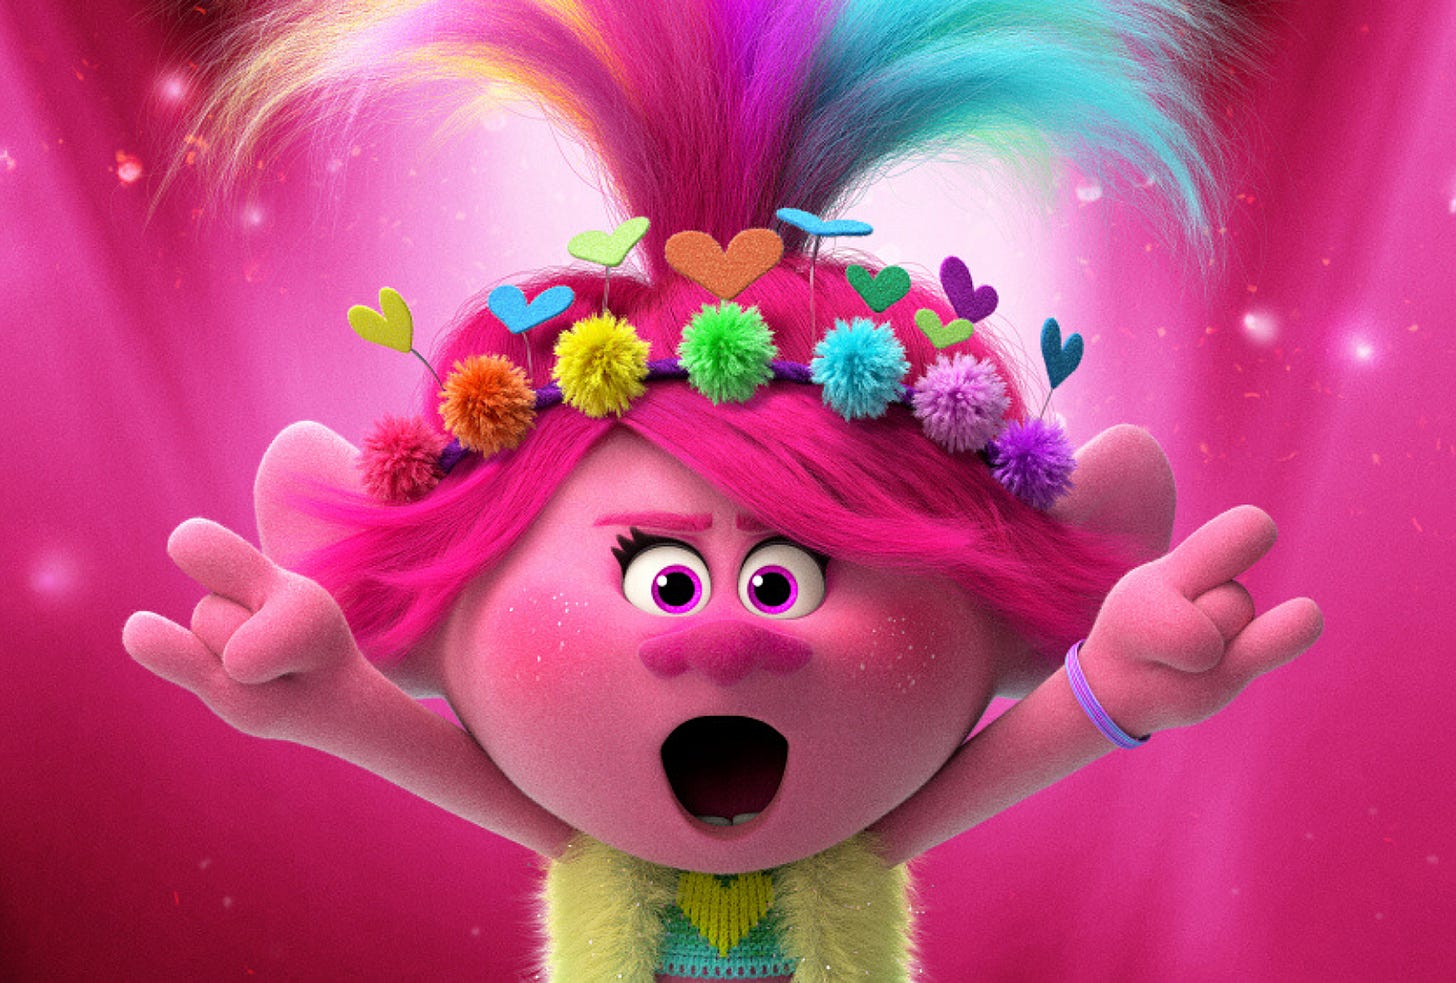 Trolls 2' Made More on VOD Than The Original Did in Theaters